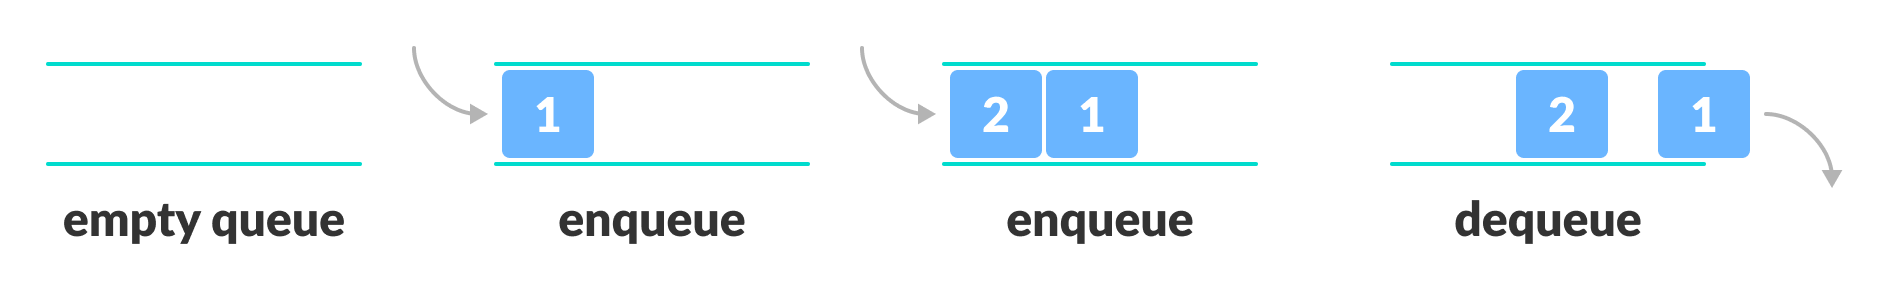 Representation of Queue in first in first out principle